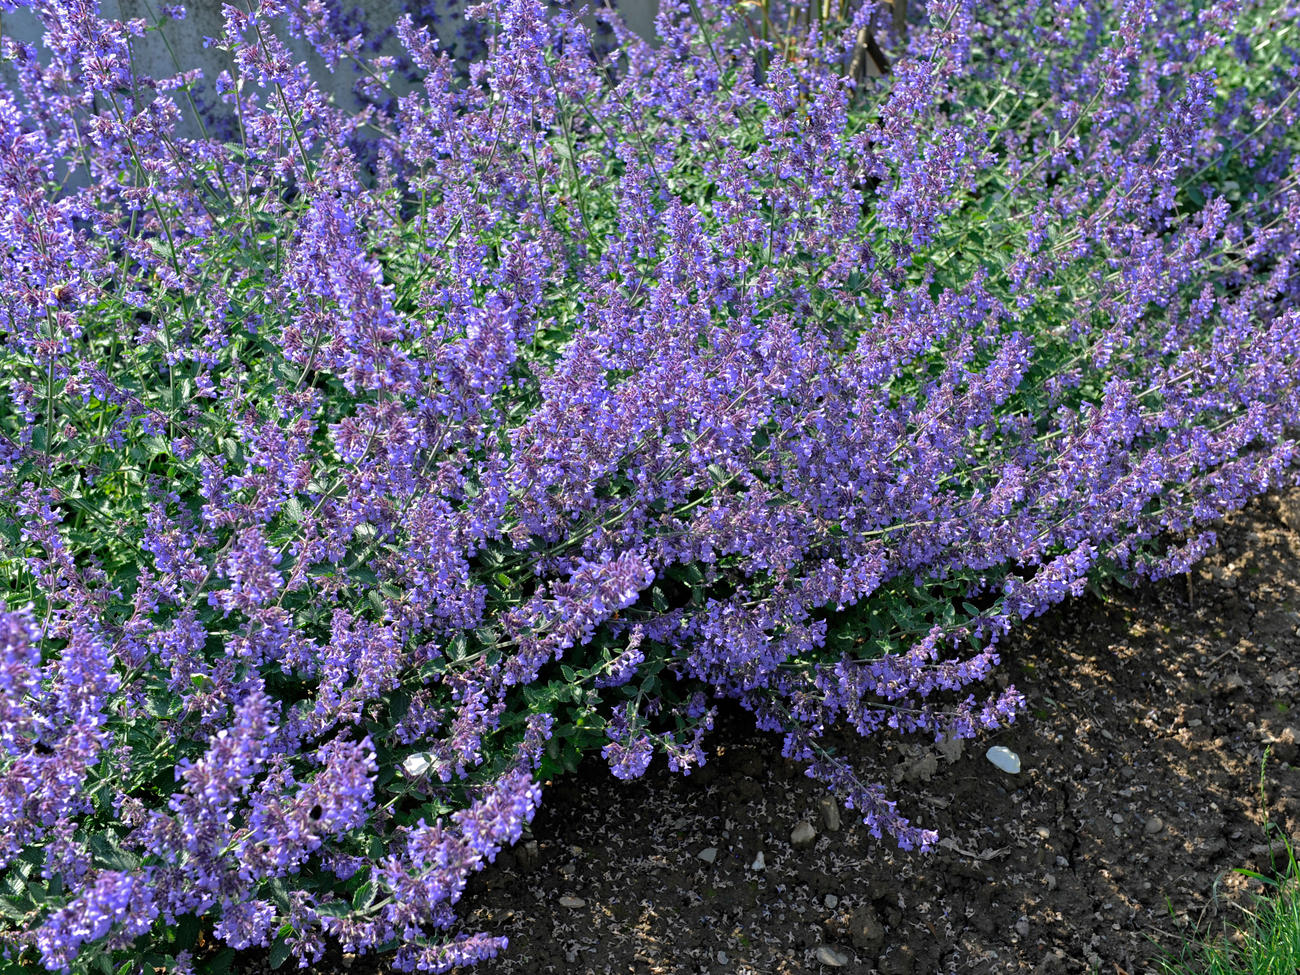 Your Guide to Catmint (Nepeta), the Cool, Refreshing Perennial